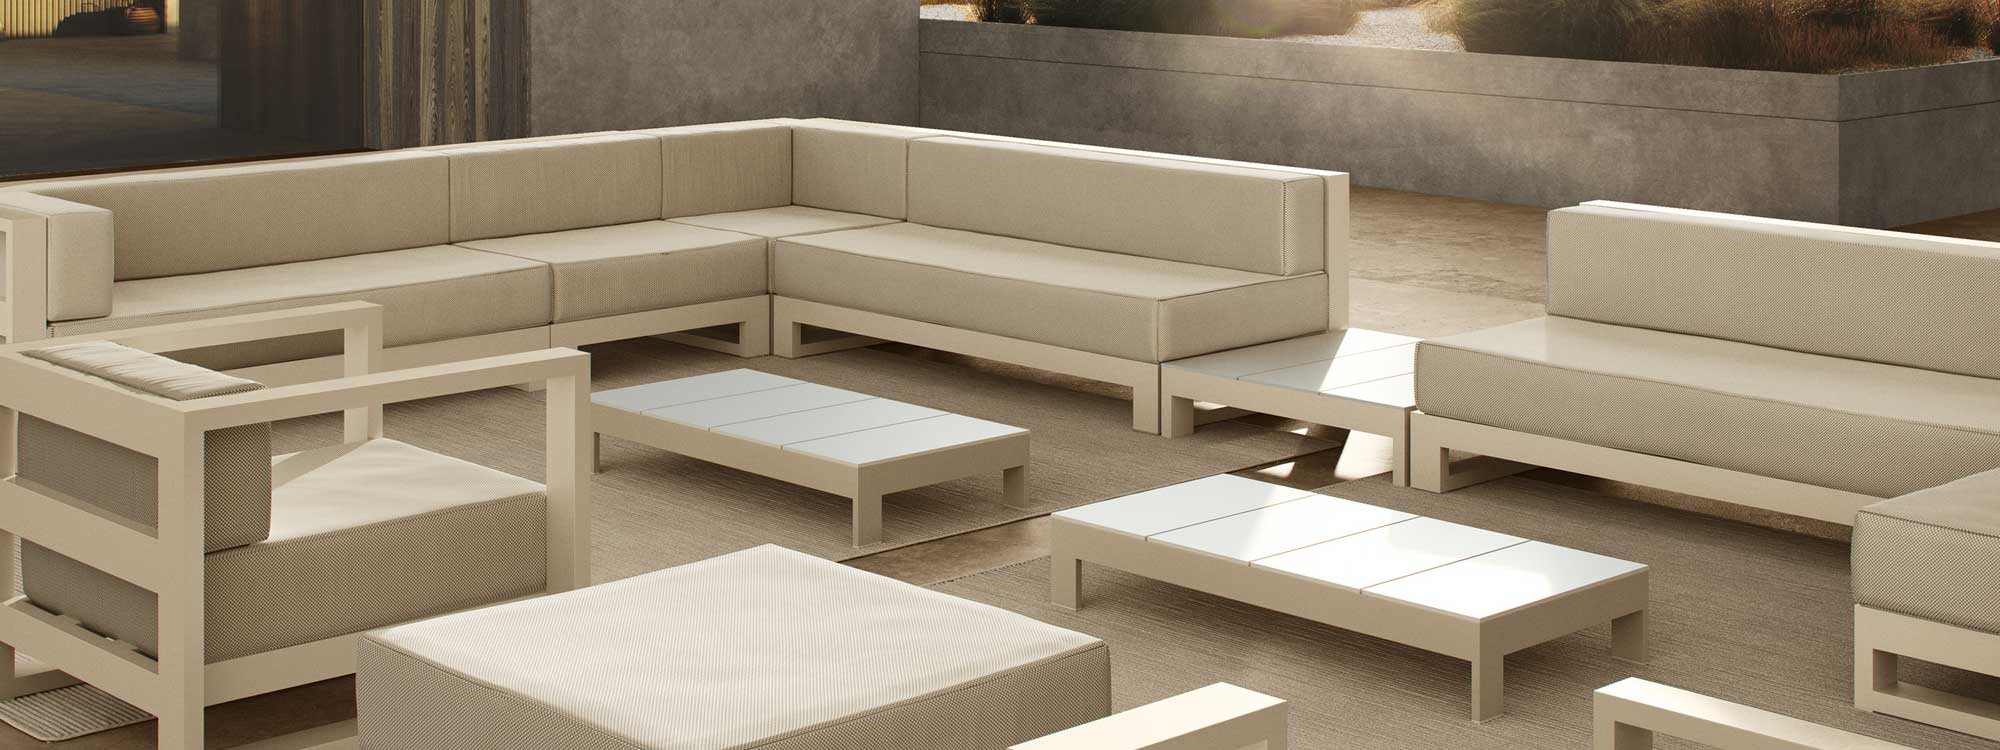 Image of Posidonia large sectional outdoor sofa and lounge chairs by Vondom